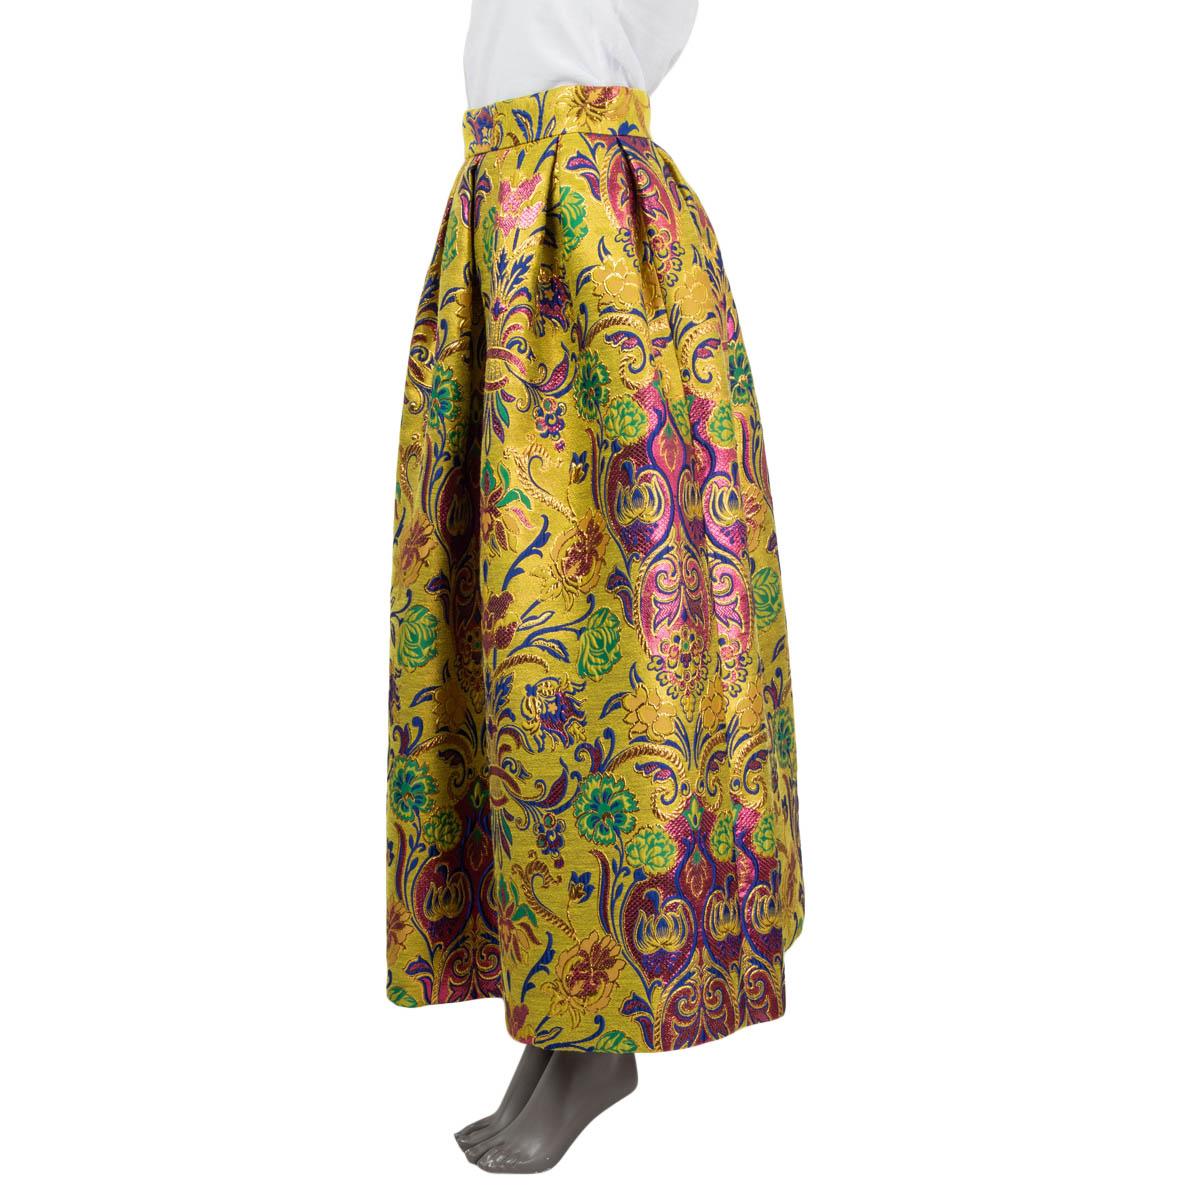 100% authentic Dolce & gabbana floral jacquard maxi skirt in yellow, pink, blue, green and gold polyester (67%), cotton (17%) and lurex (16%). Opens with a concealed zipper and a hook at the back. Lined in yellow silk (100%). Has been worn and is in